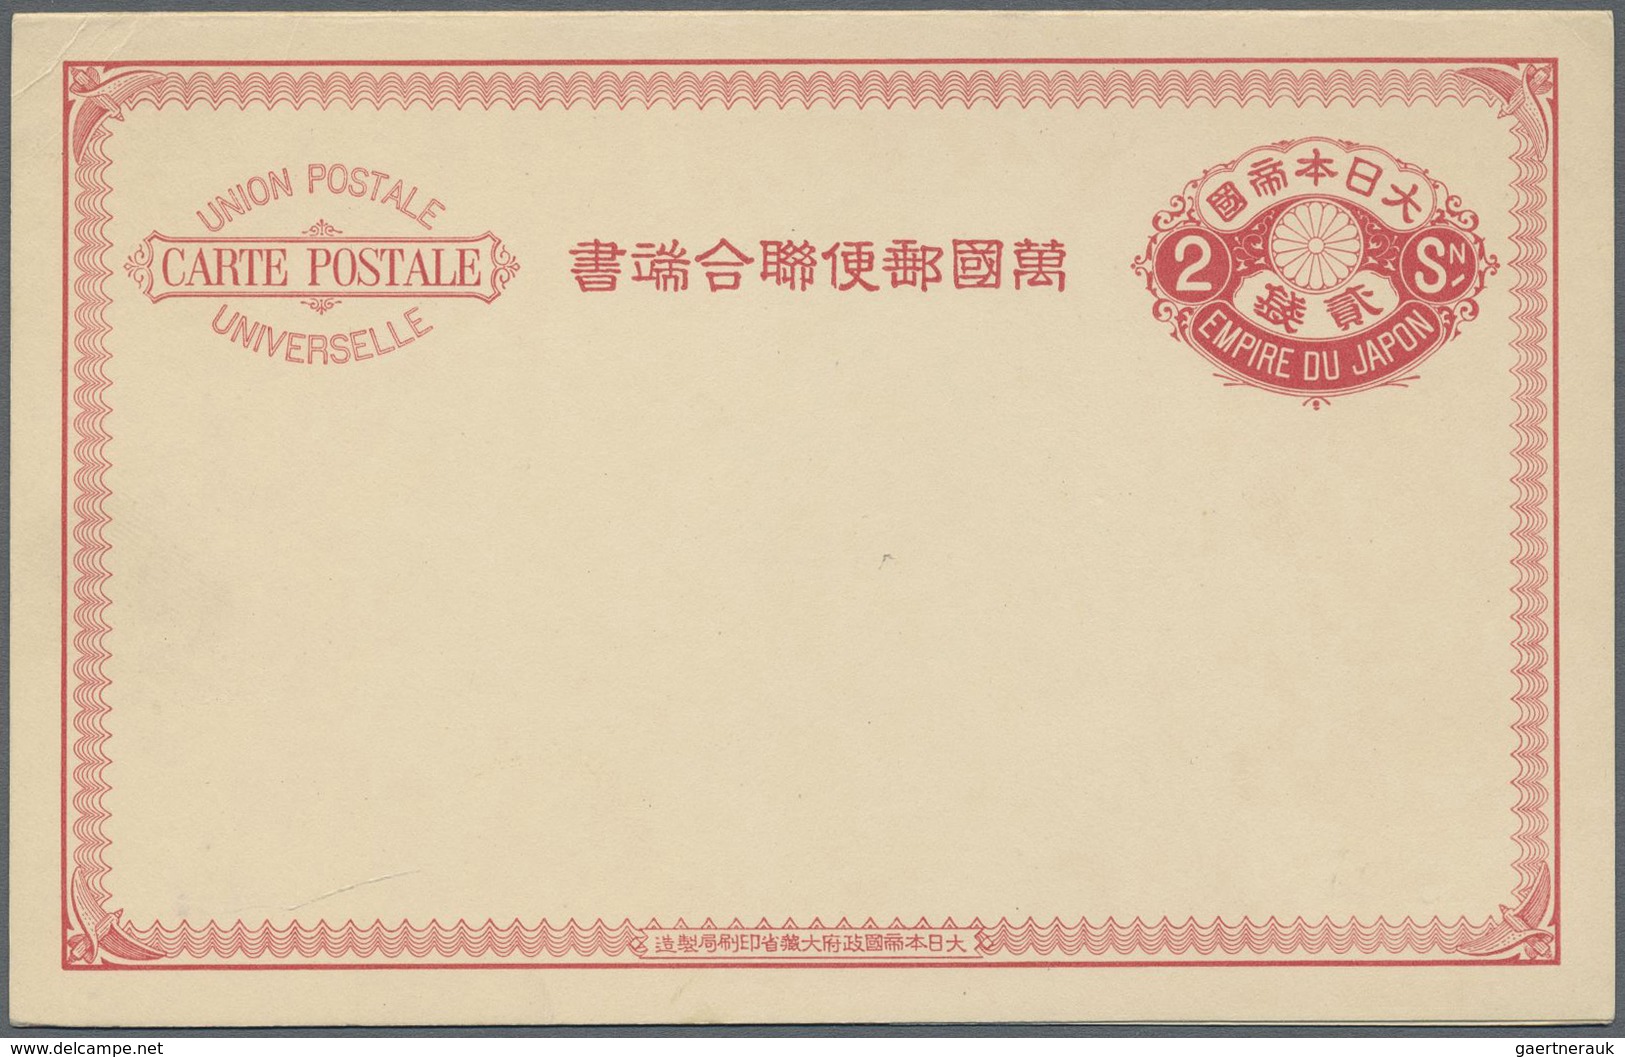 GA Japan - Ganzsachen: 1874/1922, mint and used old-time collection. Inc. uprates, used foreign, severa